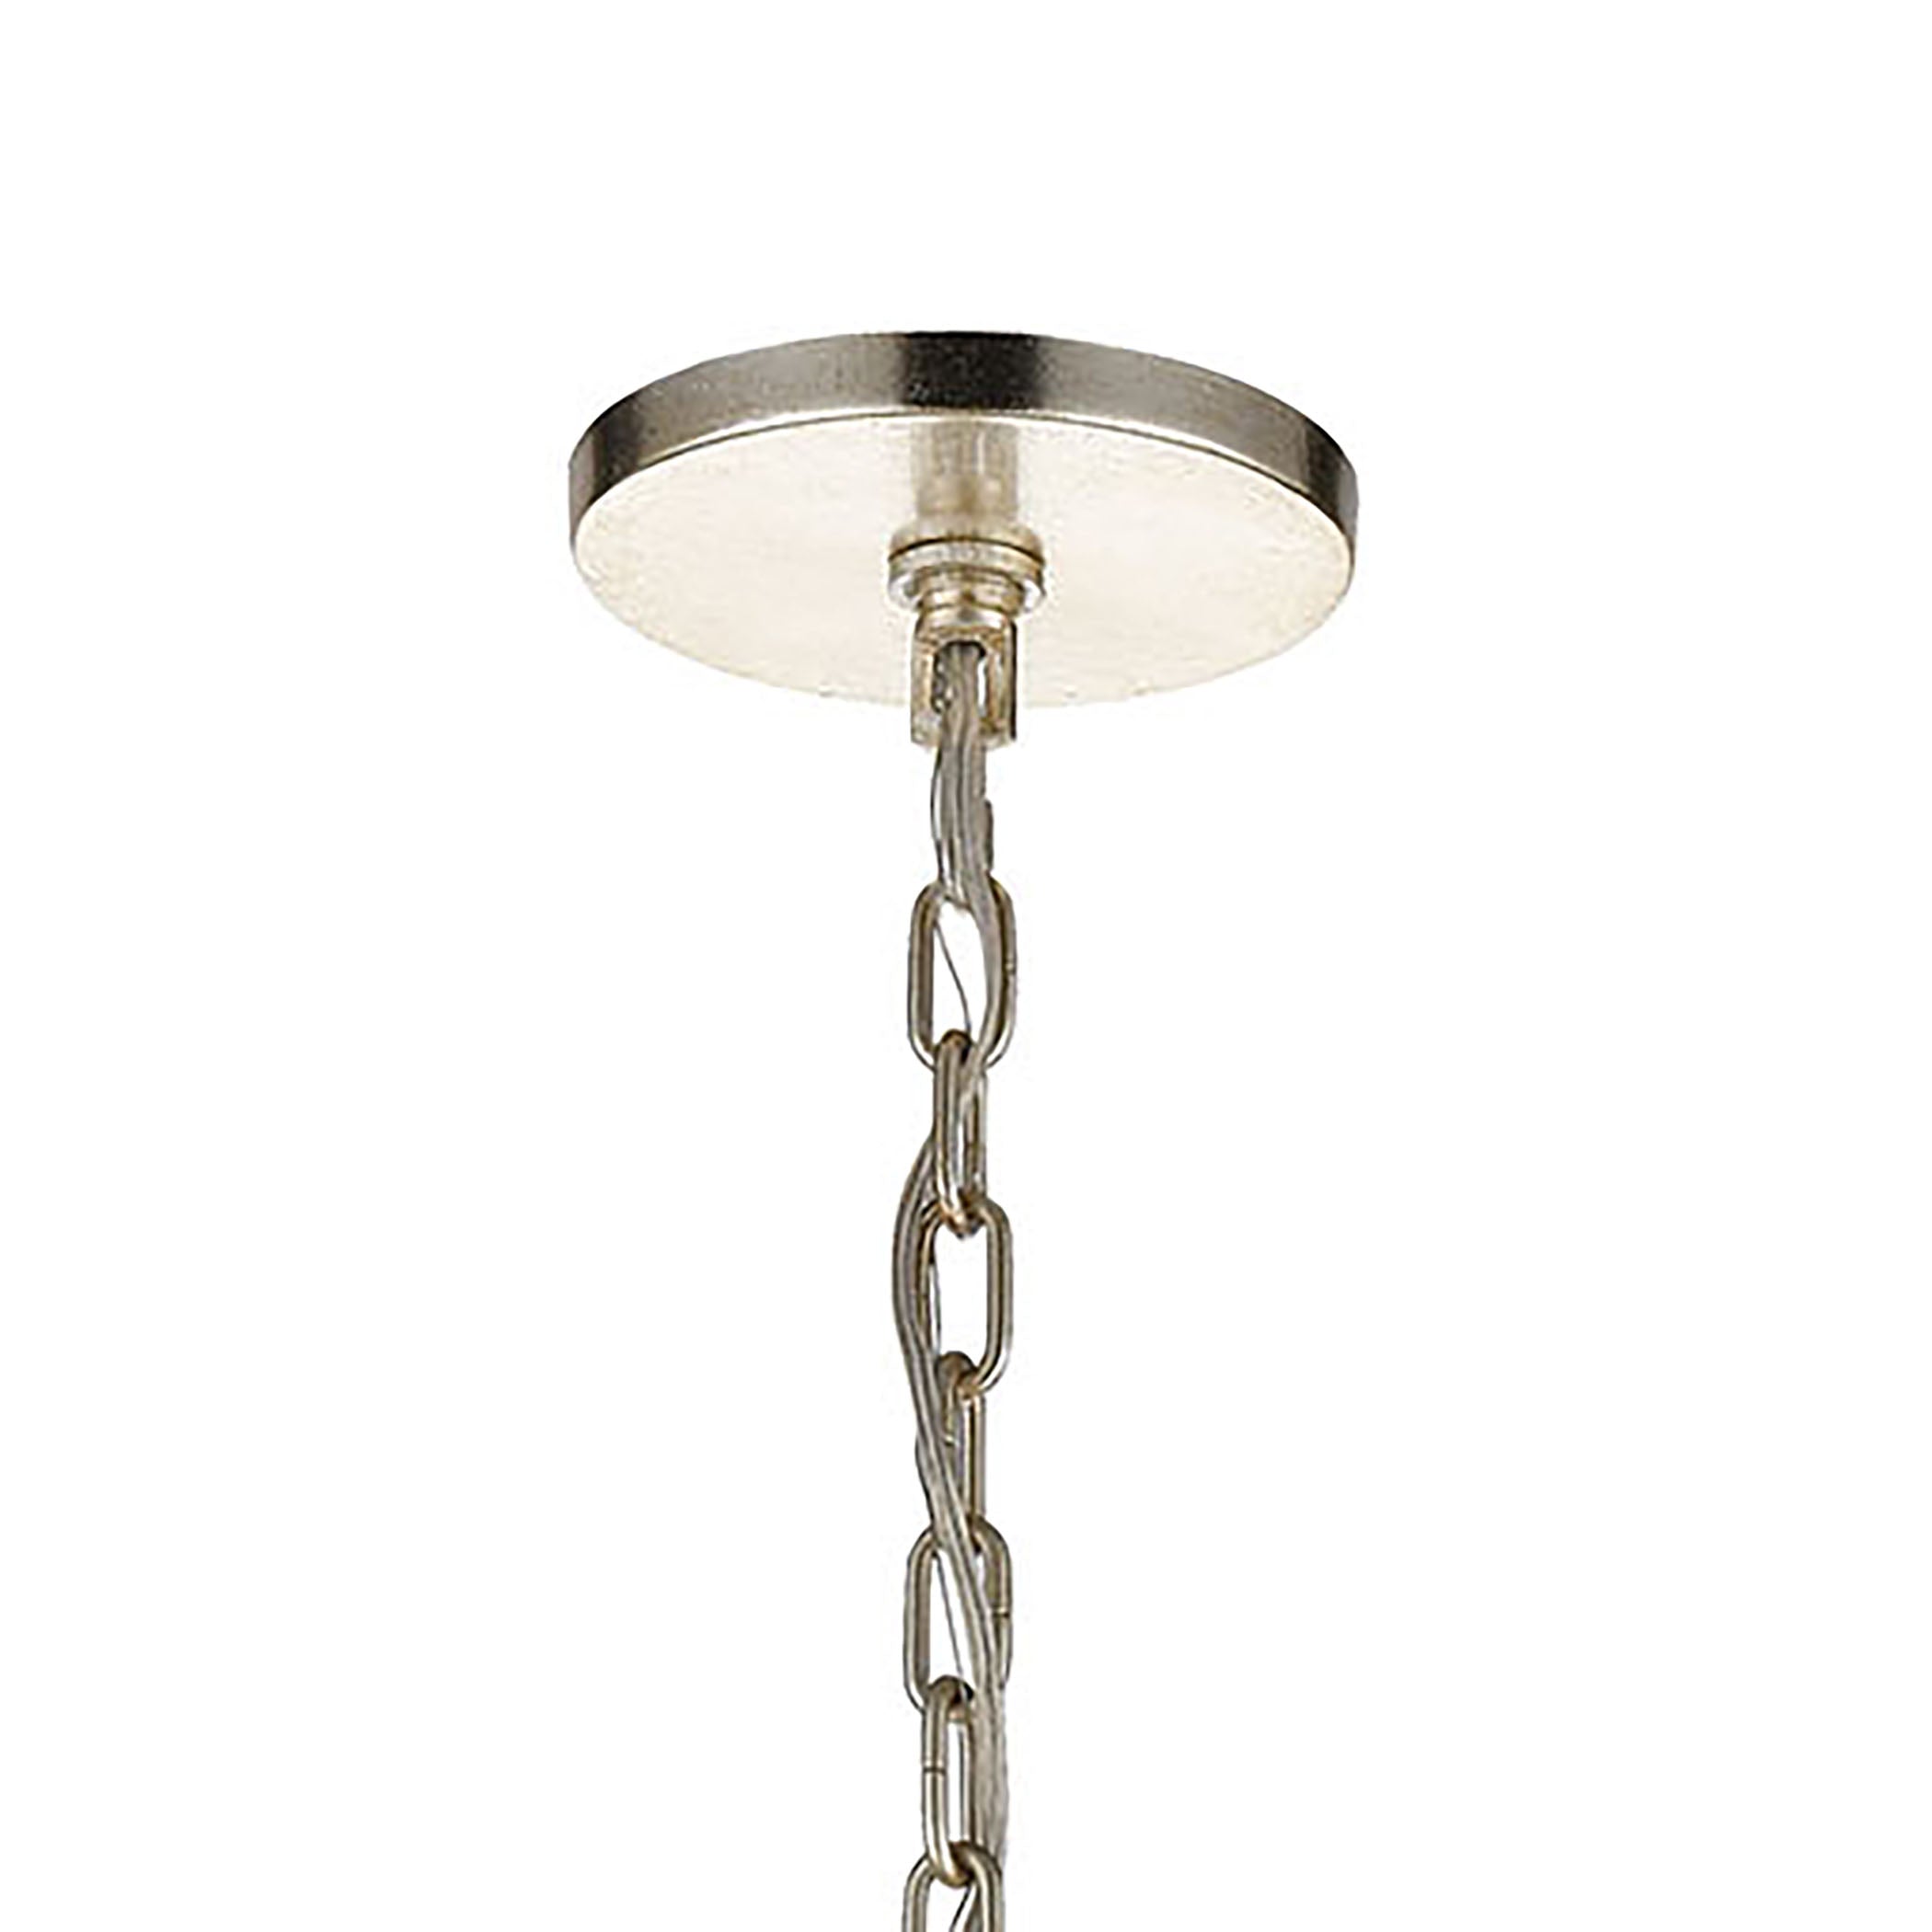 ELK Lighting 32345/7 Morning Frost 7-Light Chandelier in Silver Leaf with Clear and Frosted Glass Drops